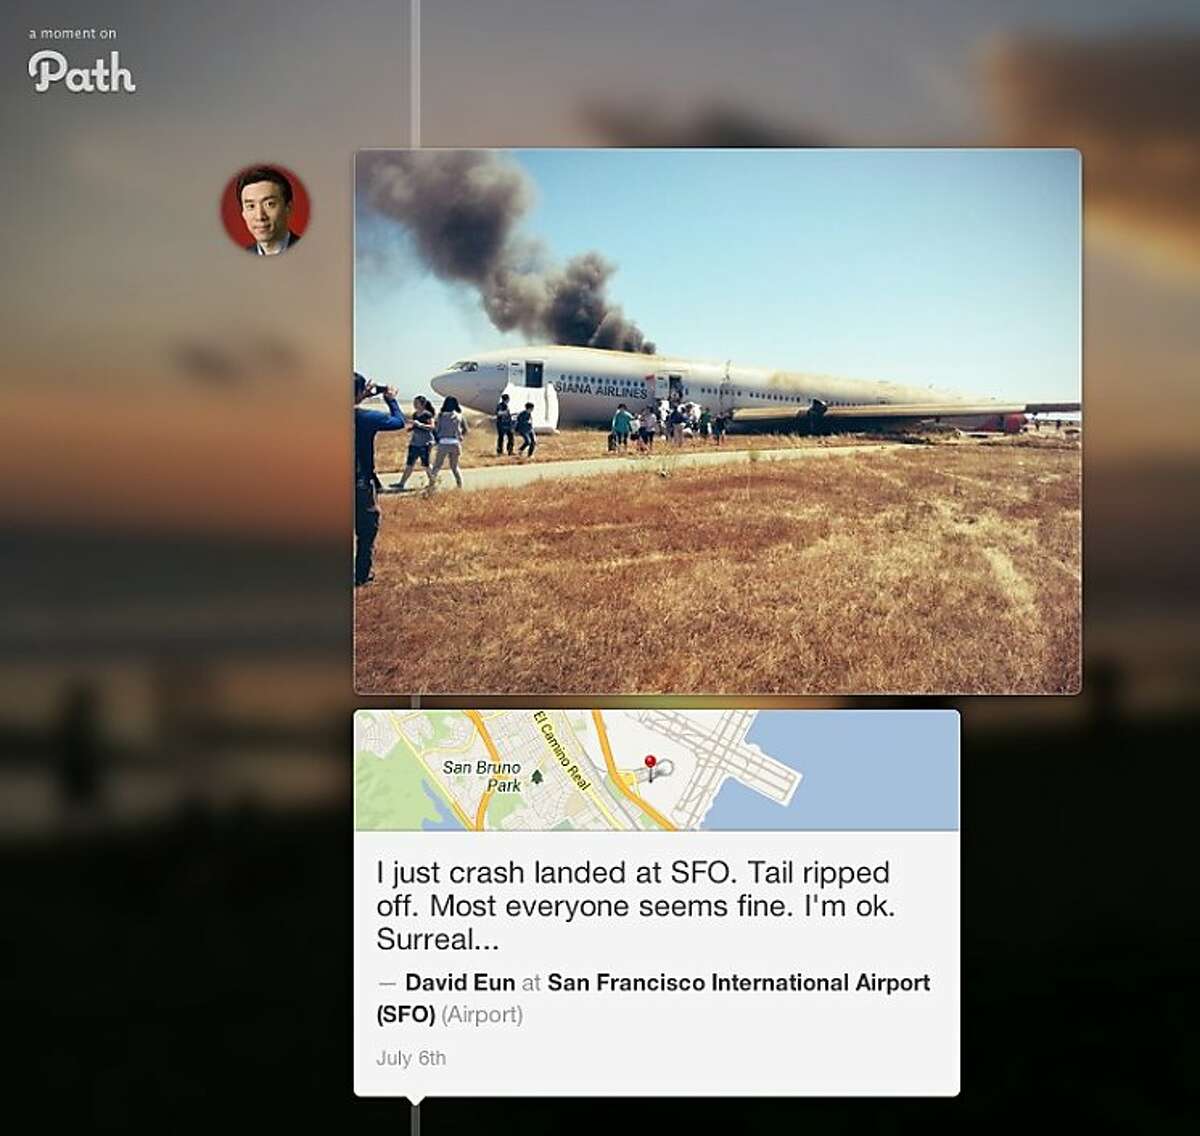 David Eun, Executive Vice President of Samsung Electronics Co. Ltd., was a passenger aboard Asiana Airlines flight 214 that crashed at San Francisco International Airport Saturday, July 7, 2013. He published this photograph and comment to his Path account and subsequently shared it to his Twitter feed. A screenshot shows how his content appeared on Path.